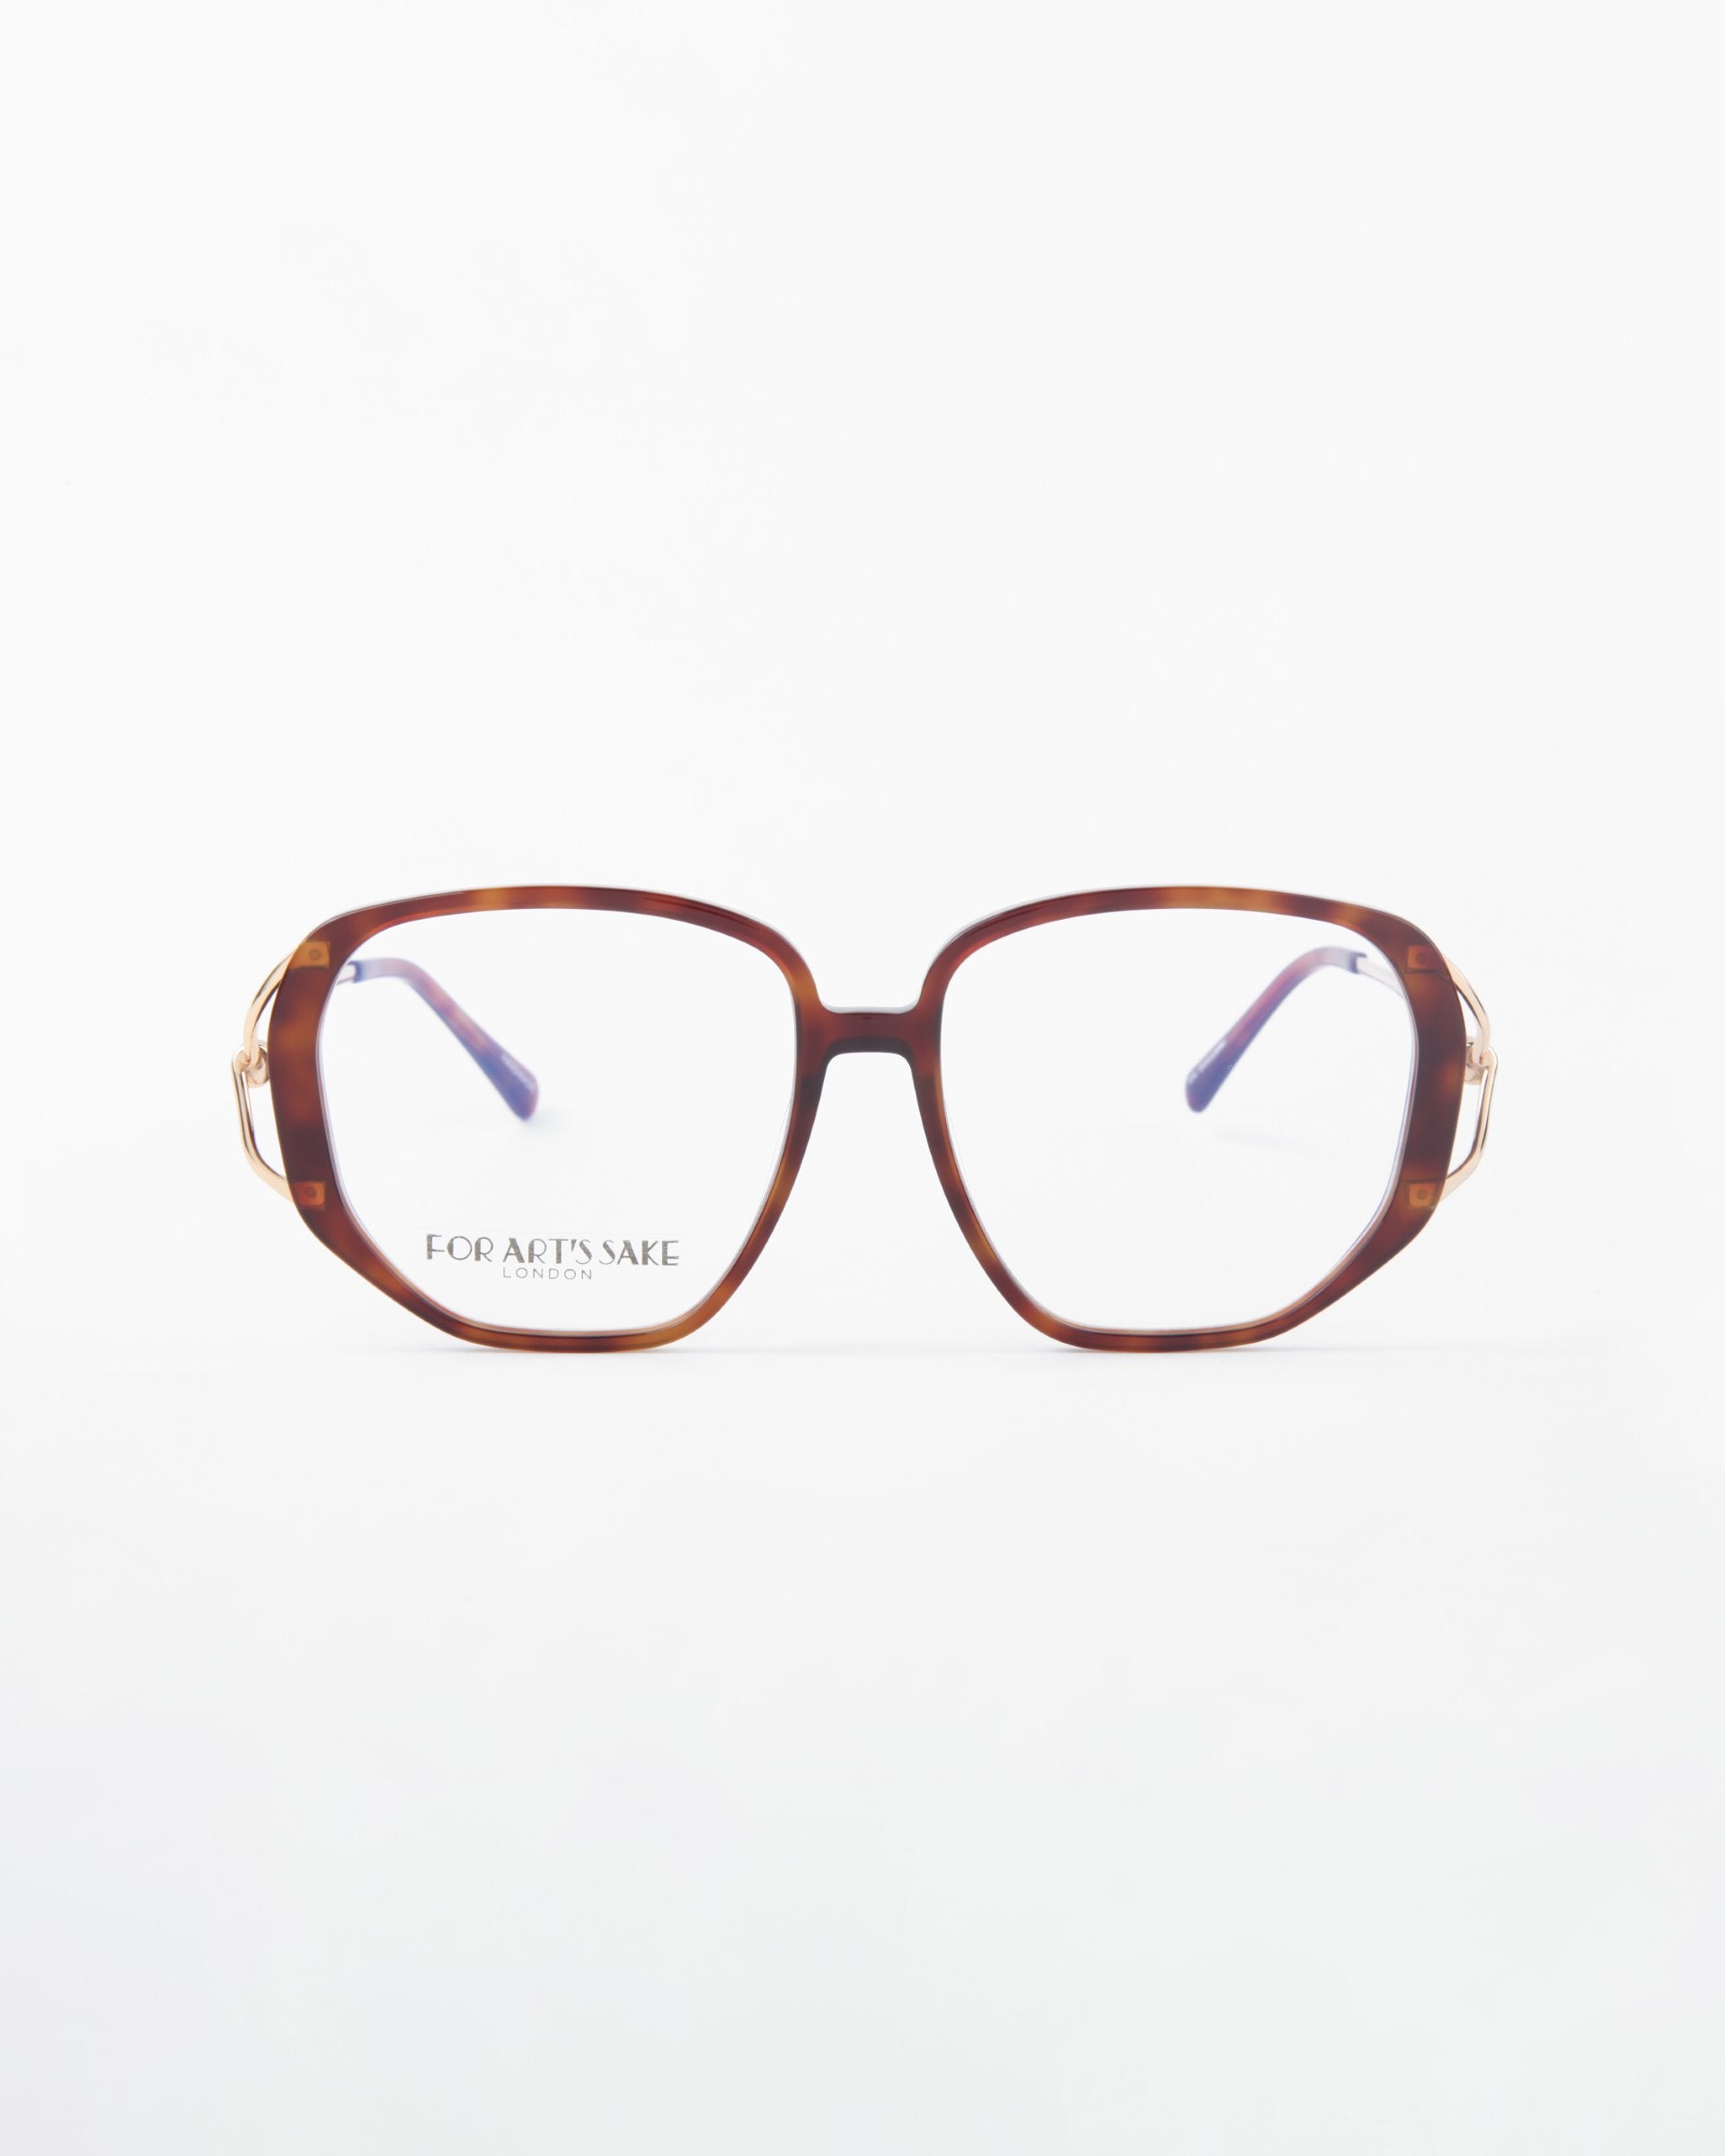 A pair of eyeglasses with large, square tortoiseshell frames and clear lenses is centered on a plain white background. The temples have a slight curve, and the brand name &quot;For Art&#39;s Sake®&quot; is visible on the left lens. These stylish Remix frames also offer UV protection, ensuring your eyes stay safe in any light.